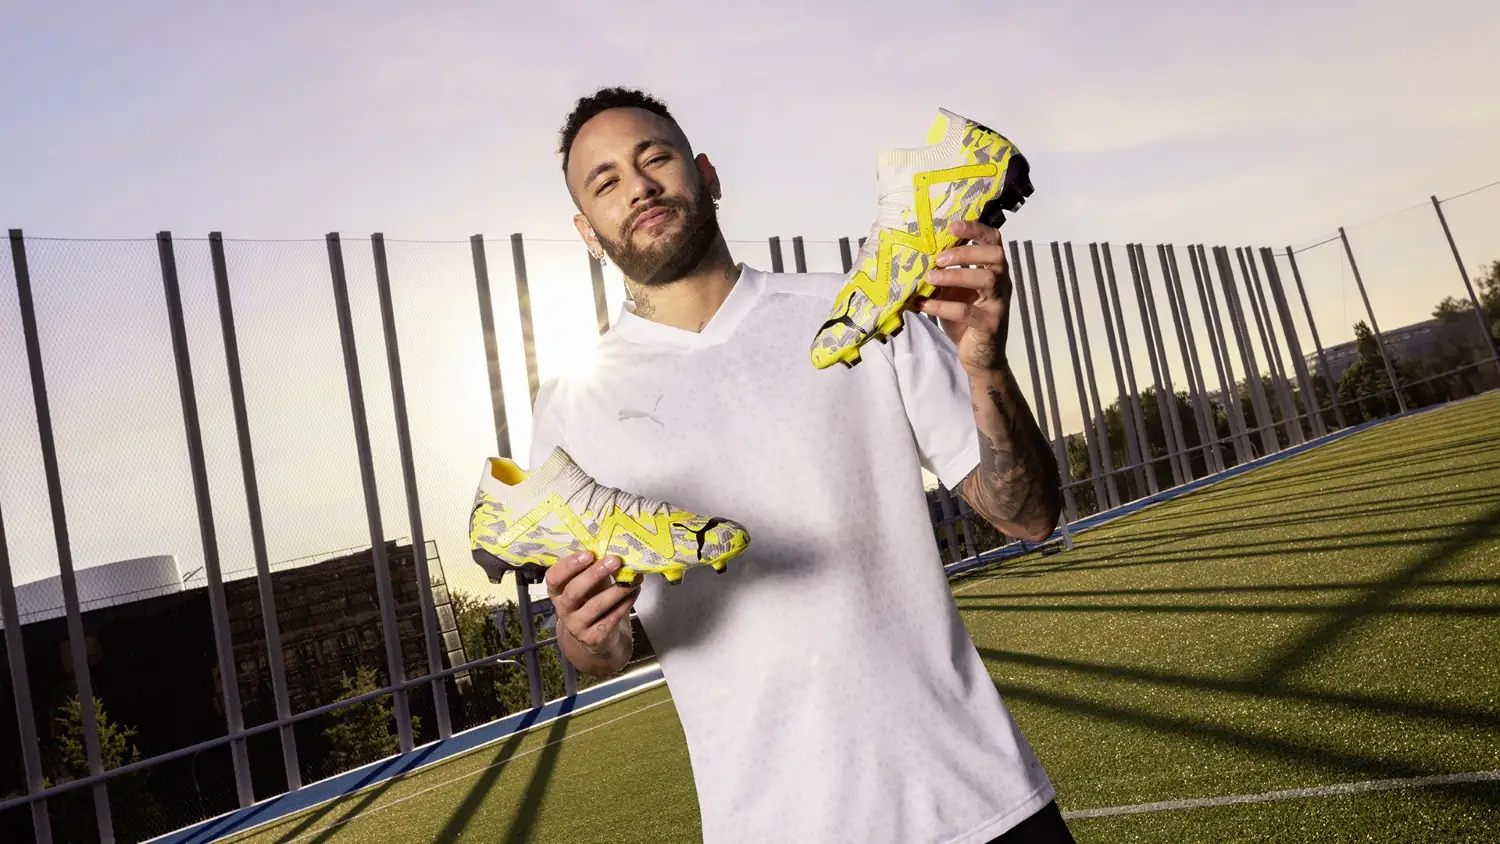 Electrify your game with Puma's Voltage Pack